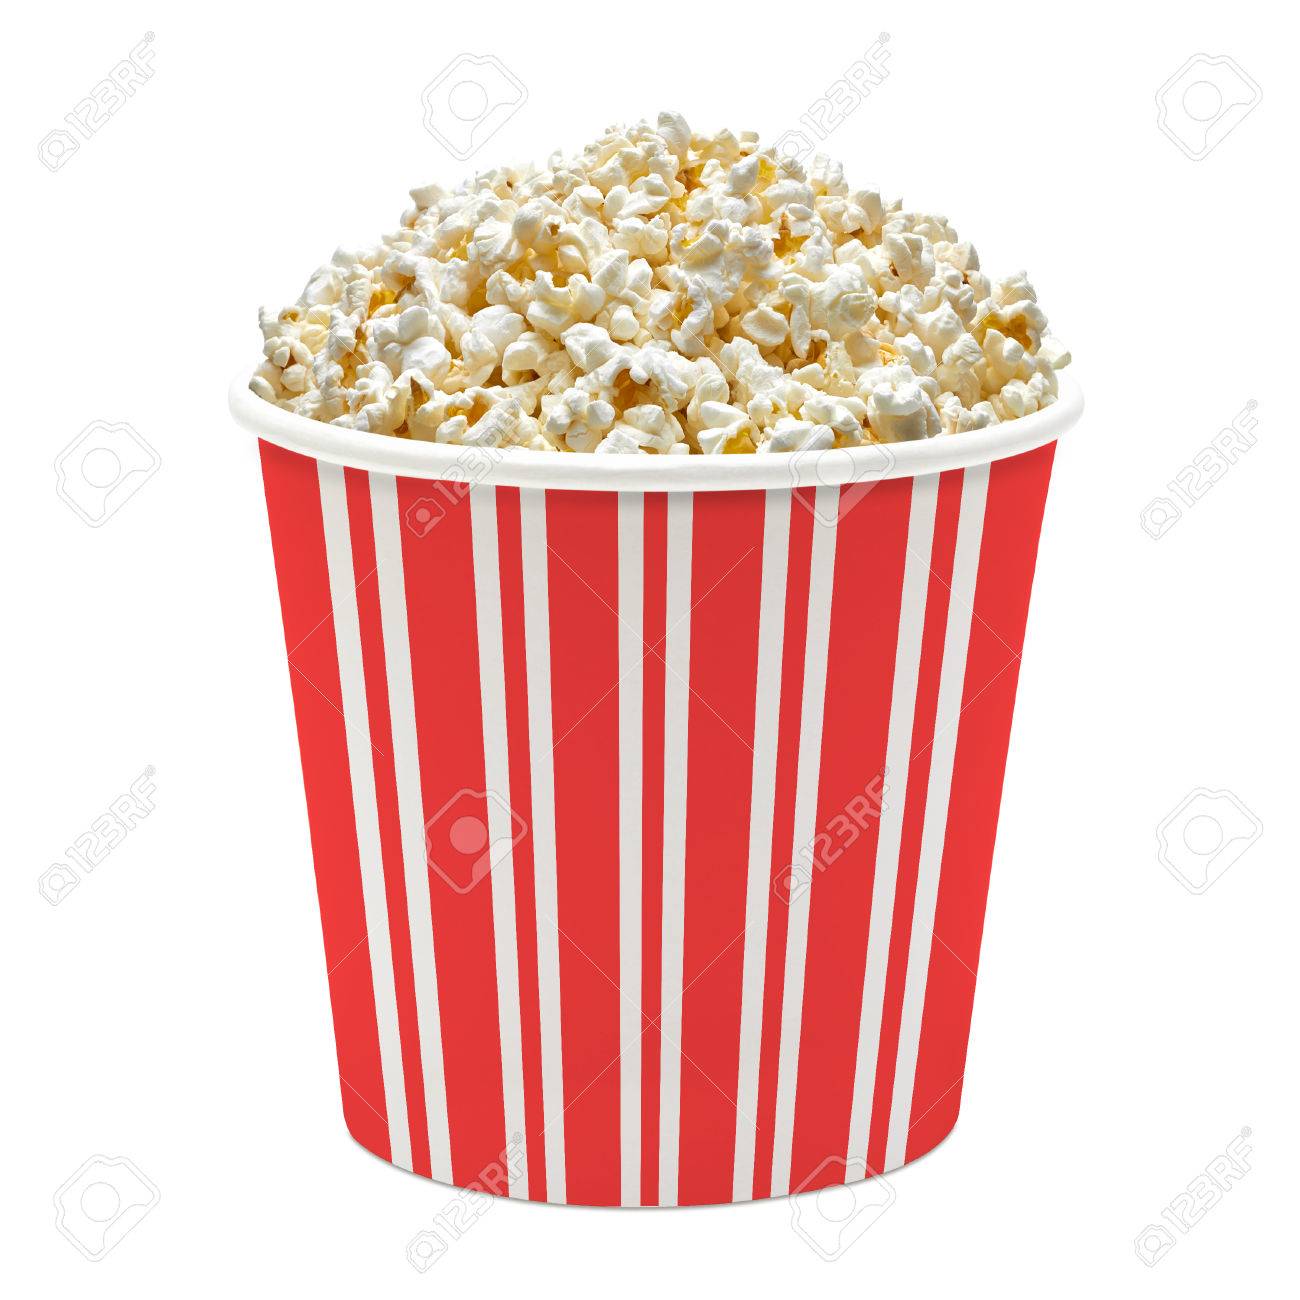 In Striped Popcorn Bucket On A White Background Stock Photo